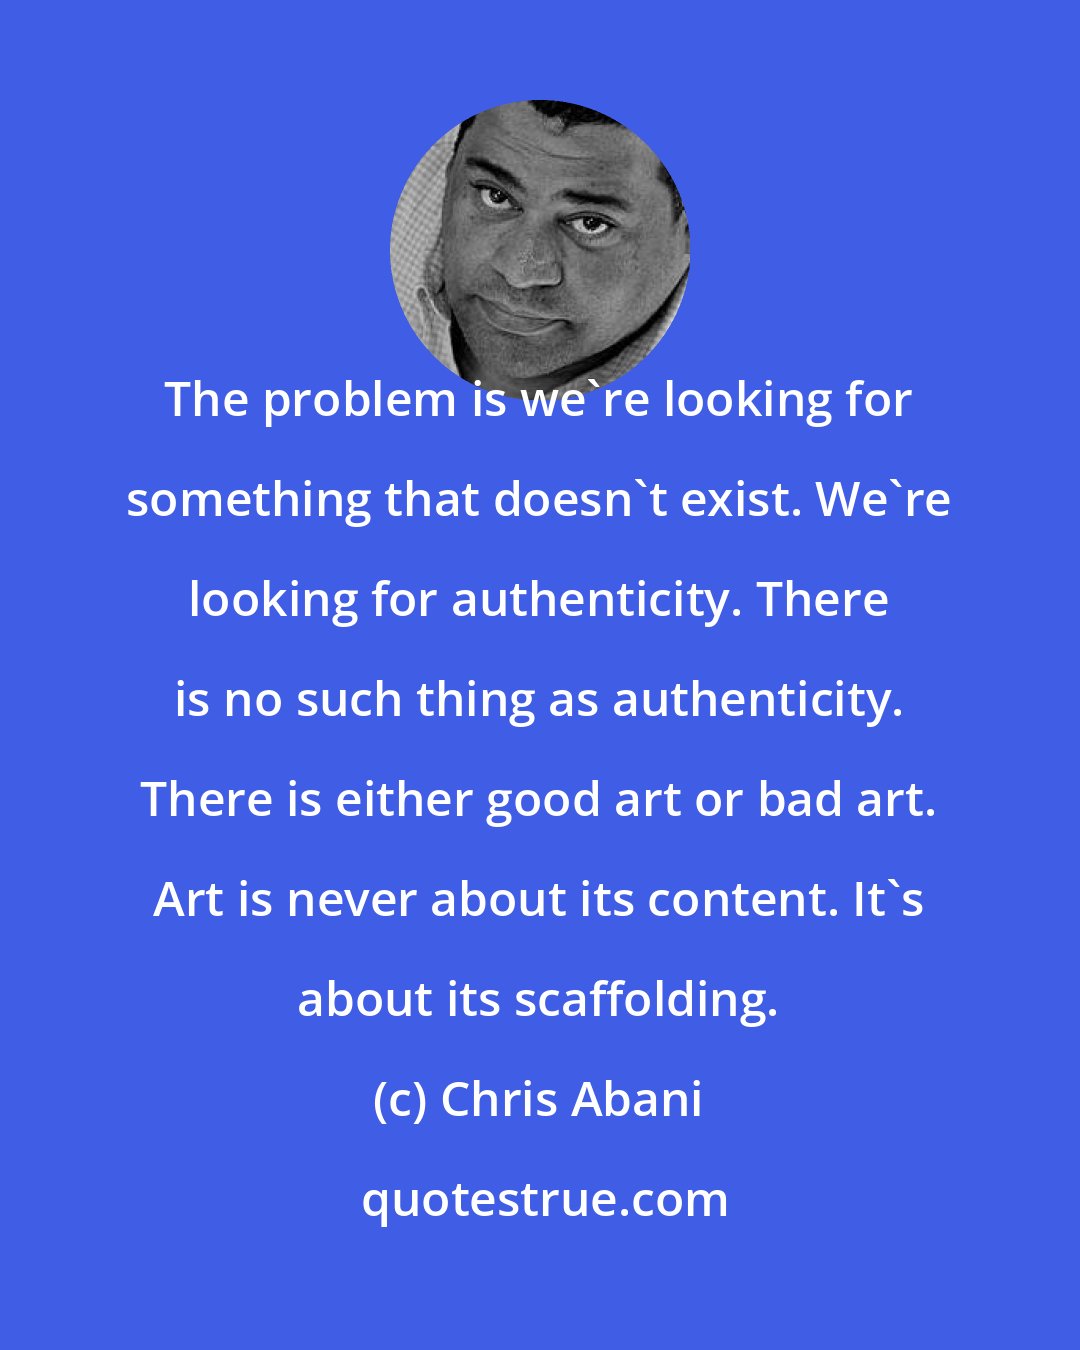 Chris Abani: The problem is we're looking for something that doesn't exist. We're looking for authenticity. There is no such thing as authenticity. There is either good art or bad art. Art is never about its content. It's about its scaffolding.